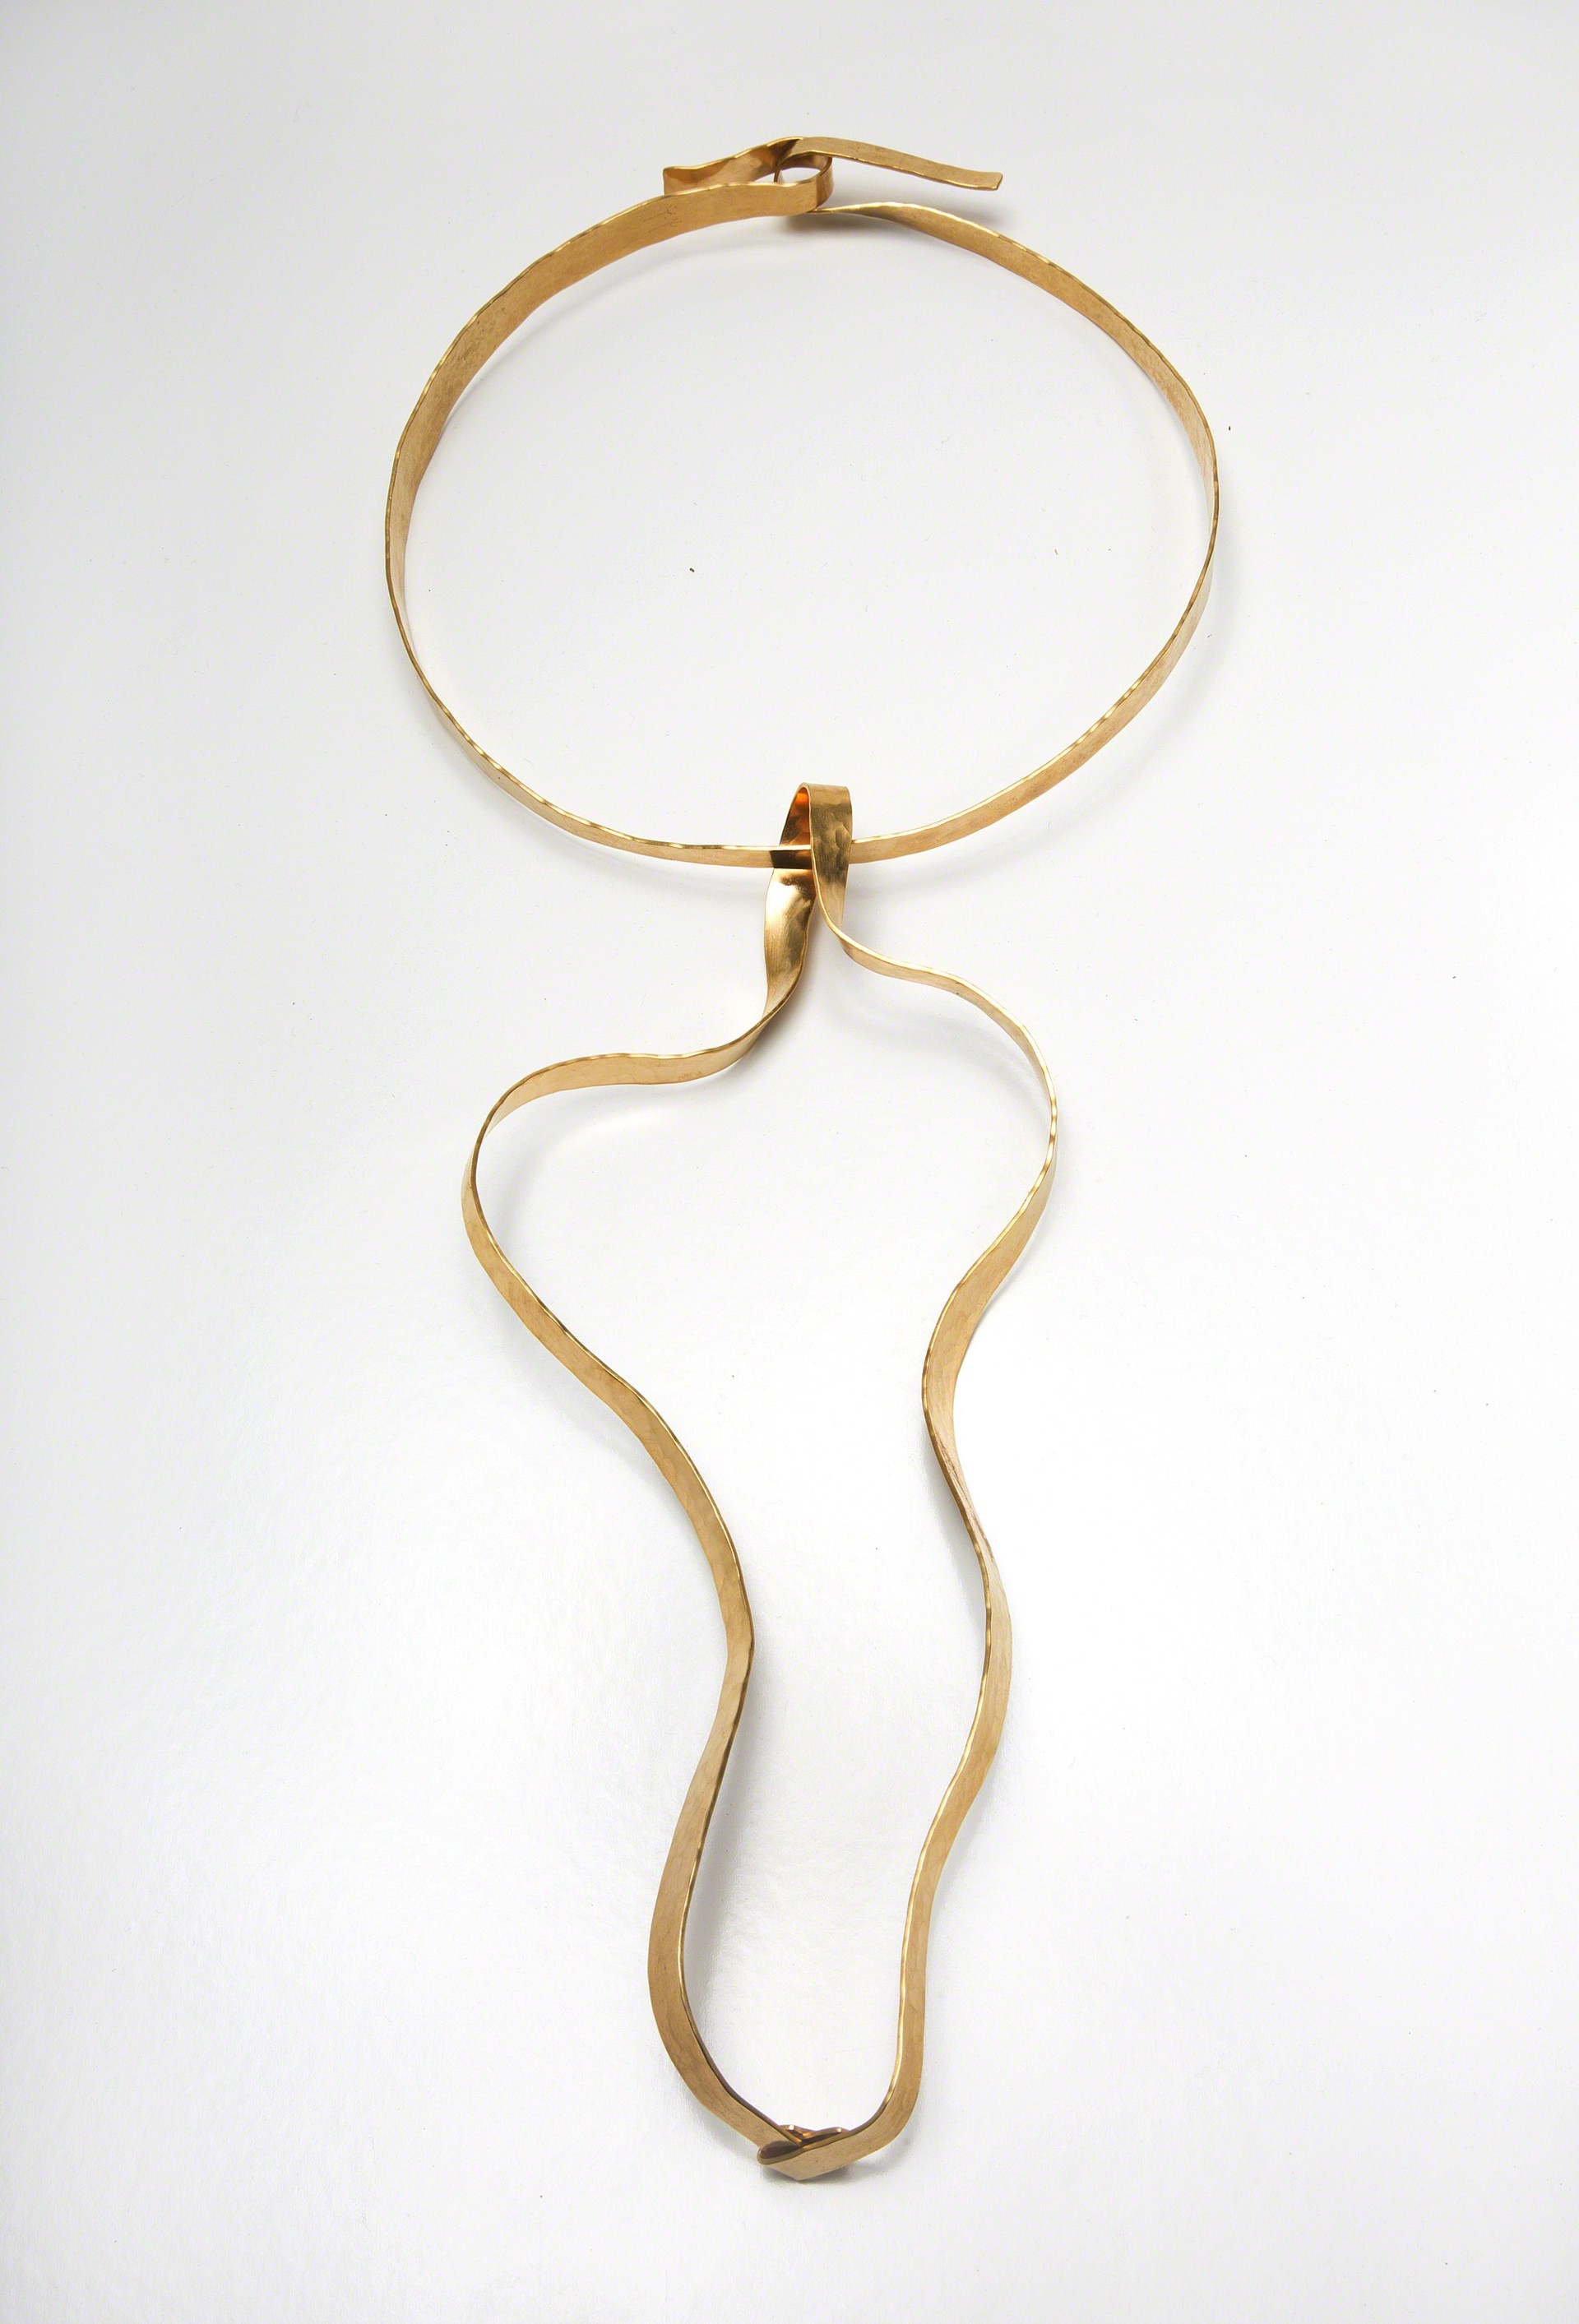 "Waves" Necklace by Jacques Jarrige